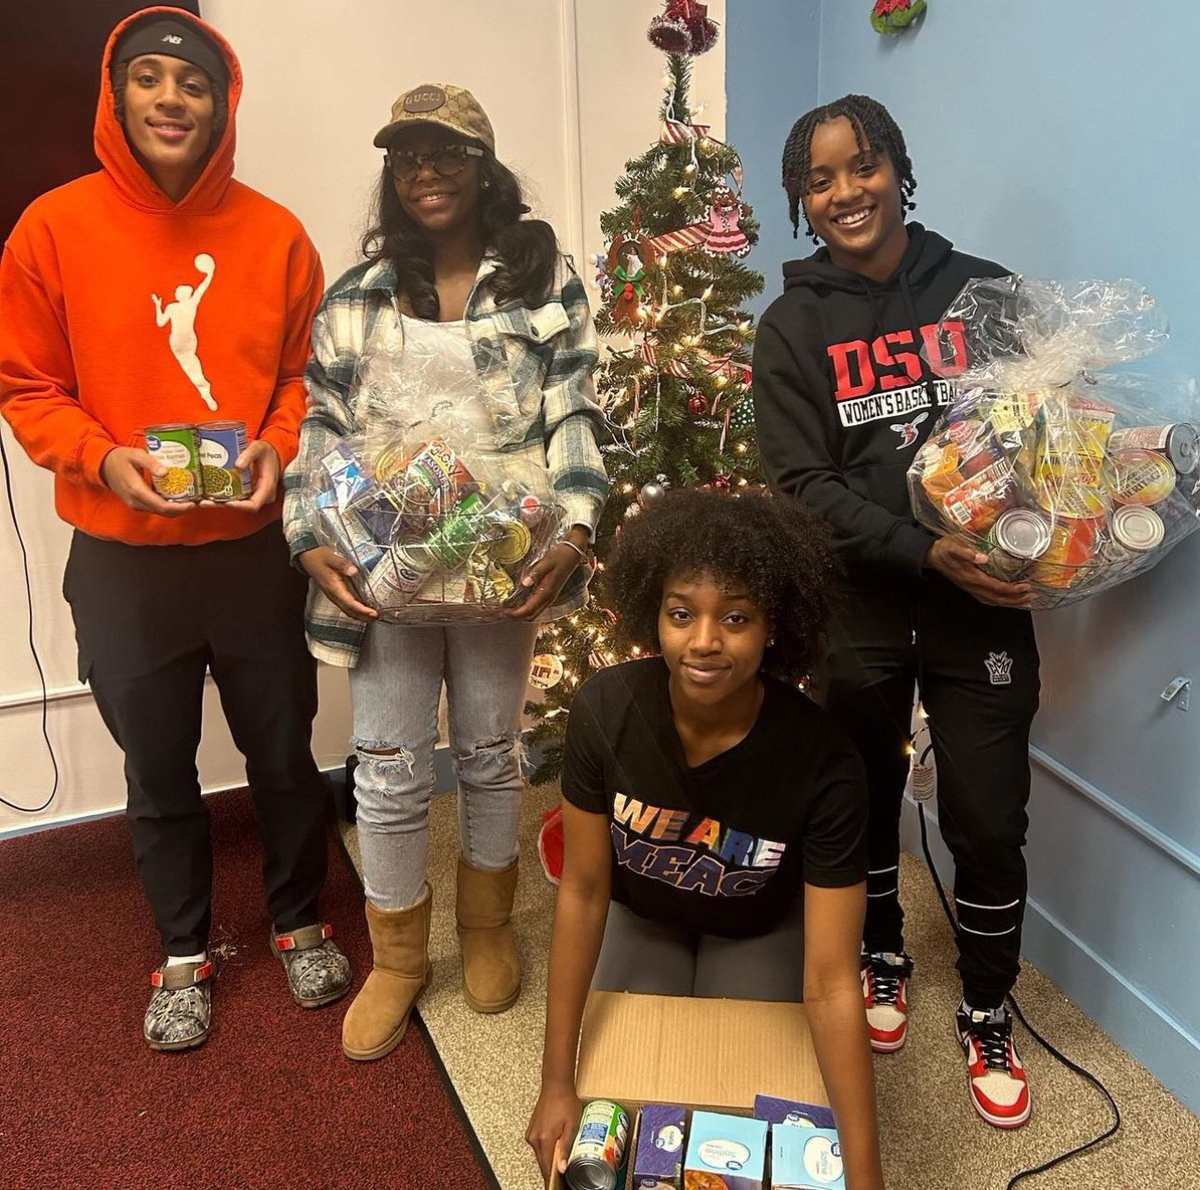 Salute 🫡 @DSUHornets making a difference! 

Thank you for your incredible support in our annual holiday food drive, bringing joy to Dover families!

Your dedication to service & teamwork truly embodies the spirit of the season & our historic @DelStateUniv
@Div1SAAC @MEACSports